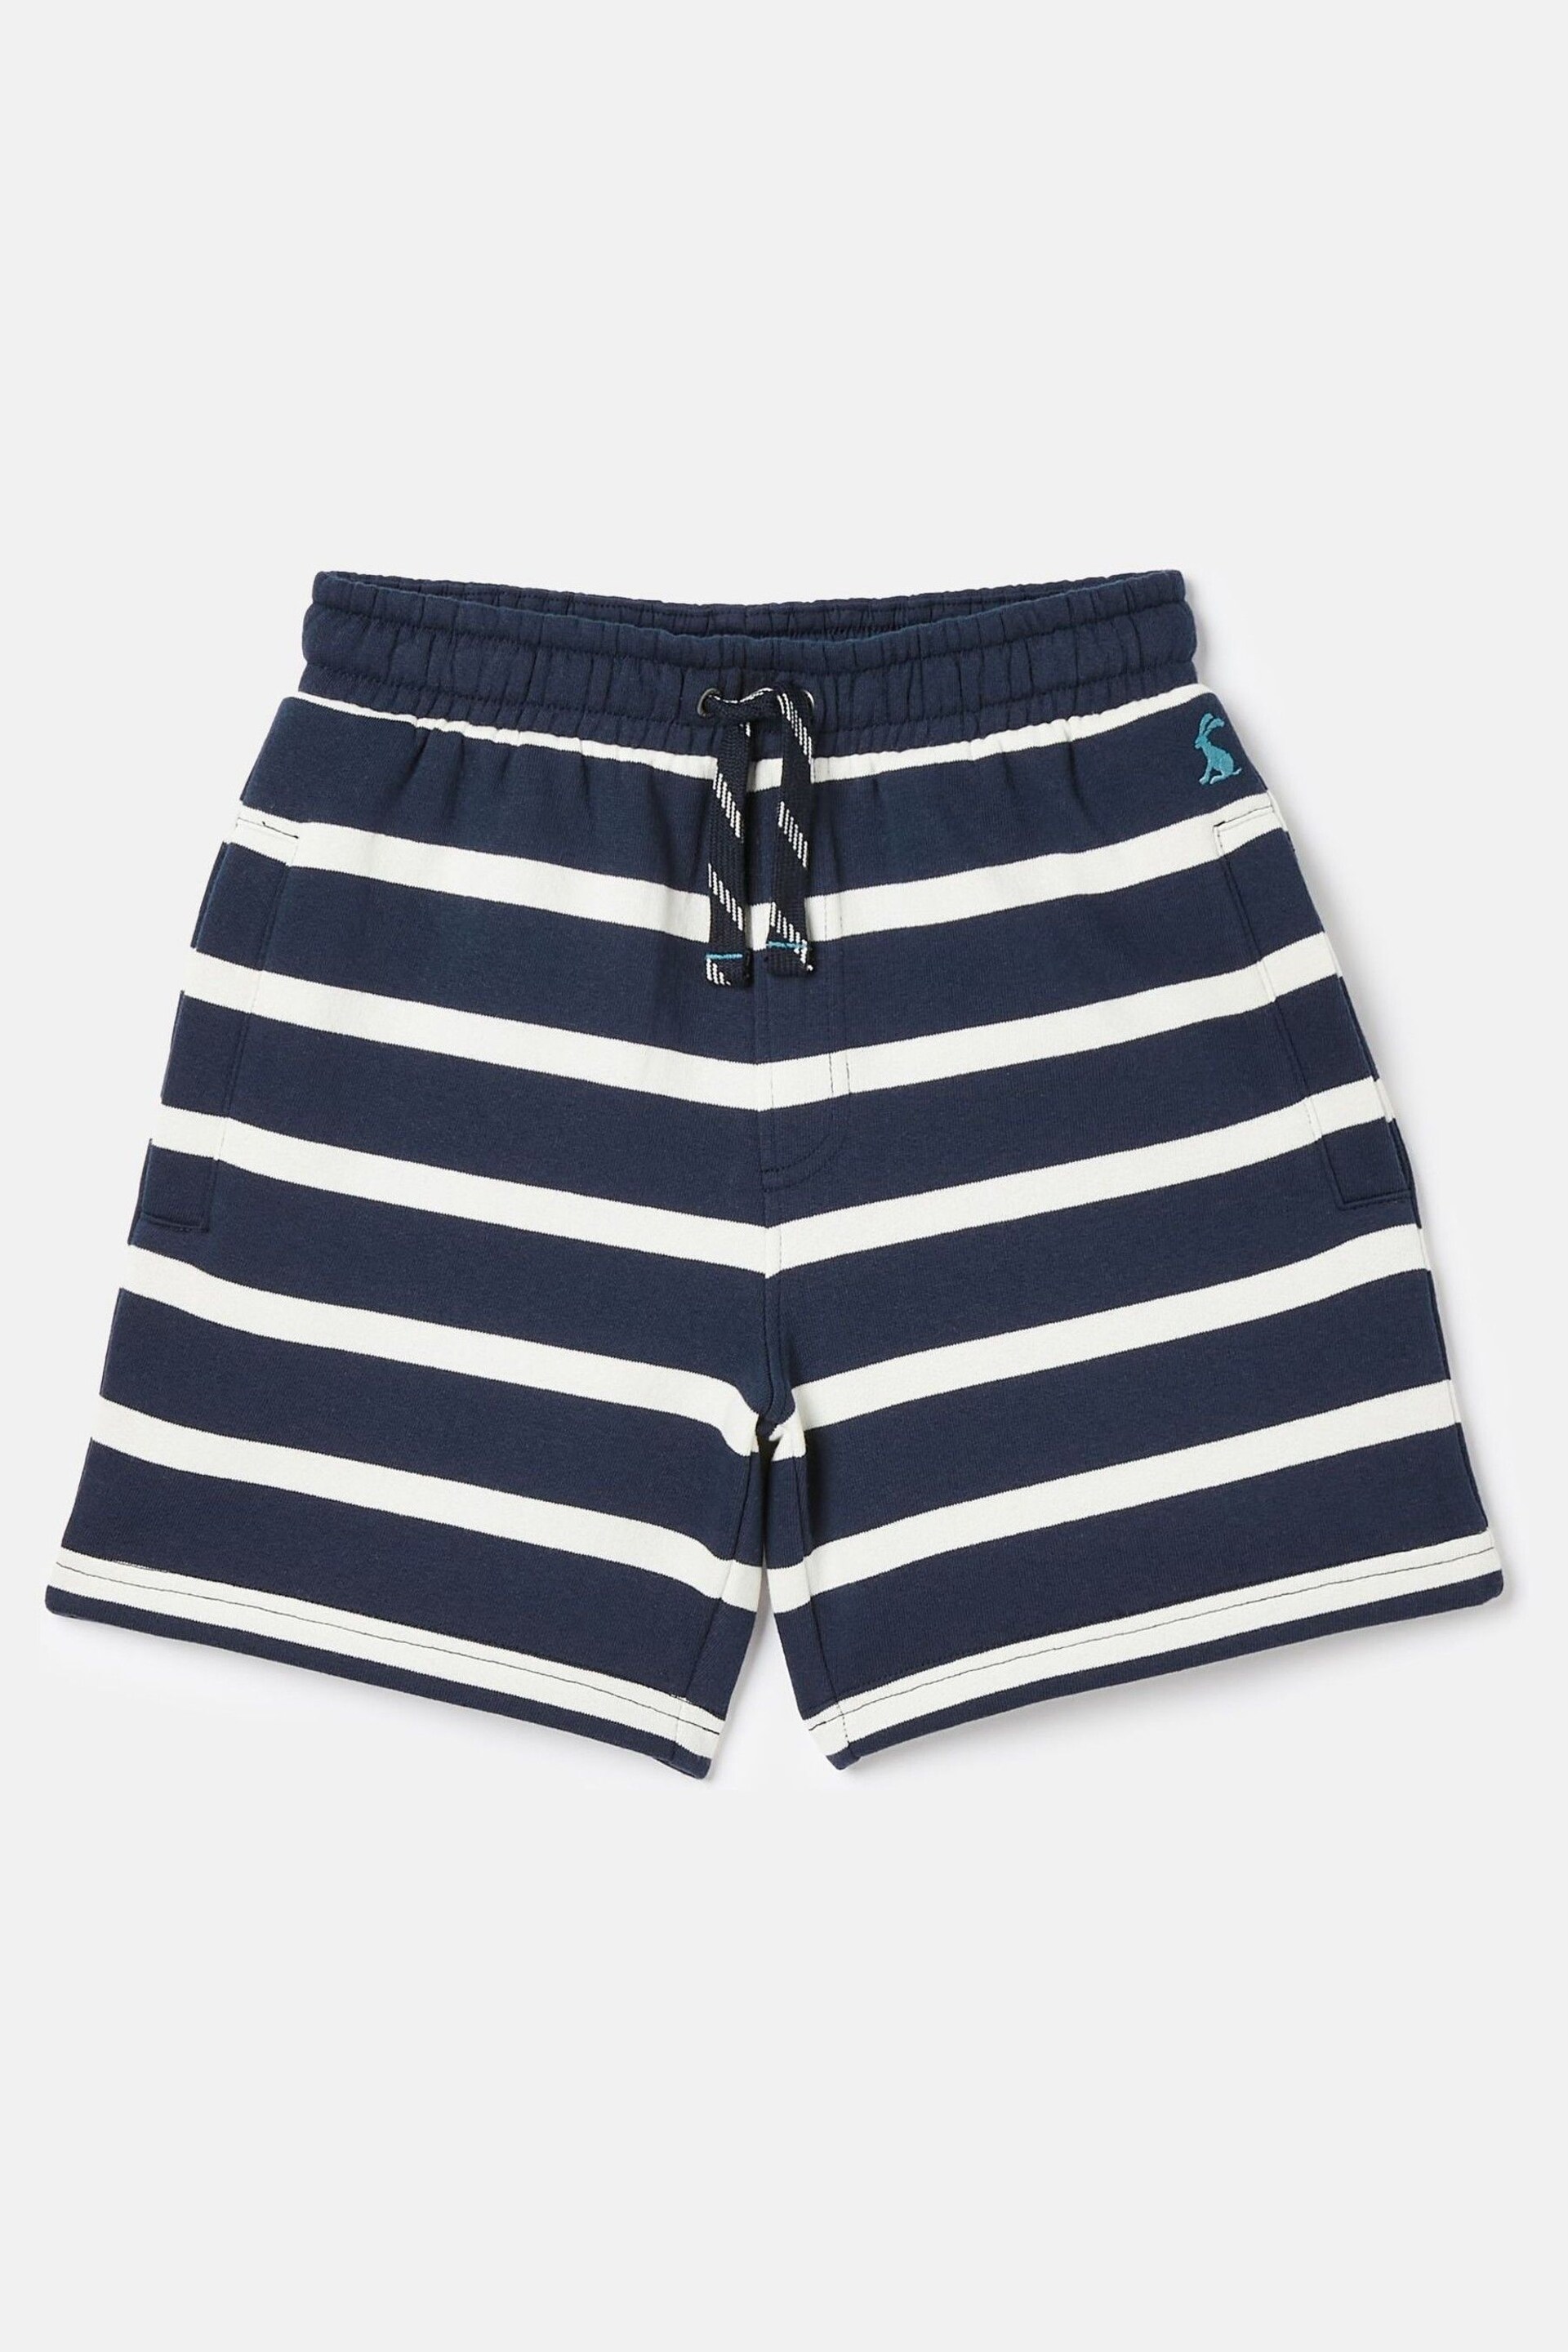 Joules Barton Navy & White Striped Jersey Shorts - Image 1 of 6